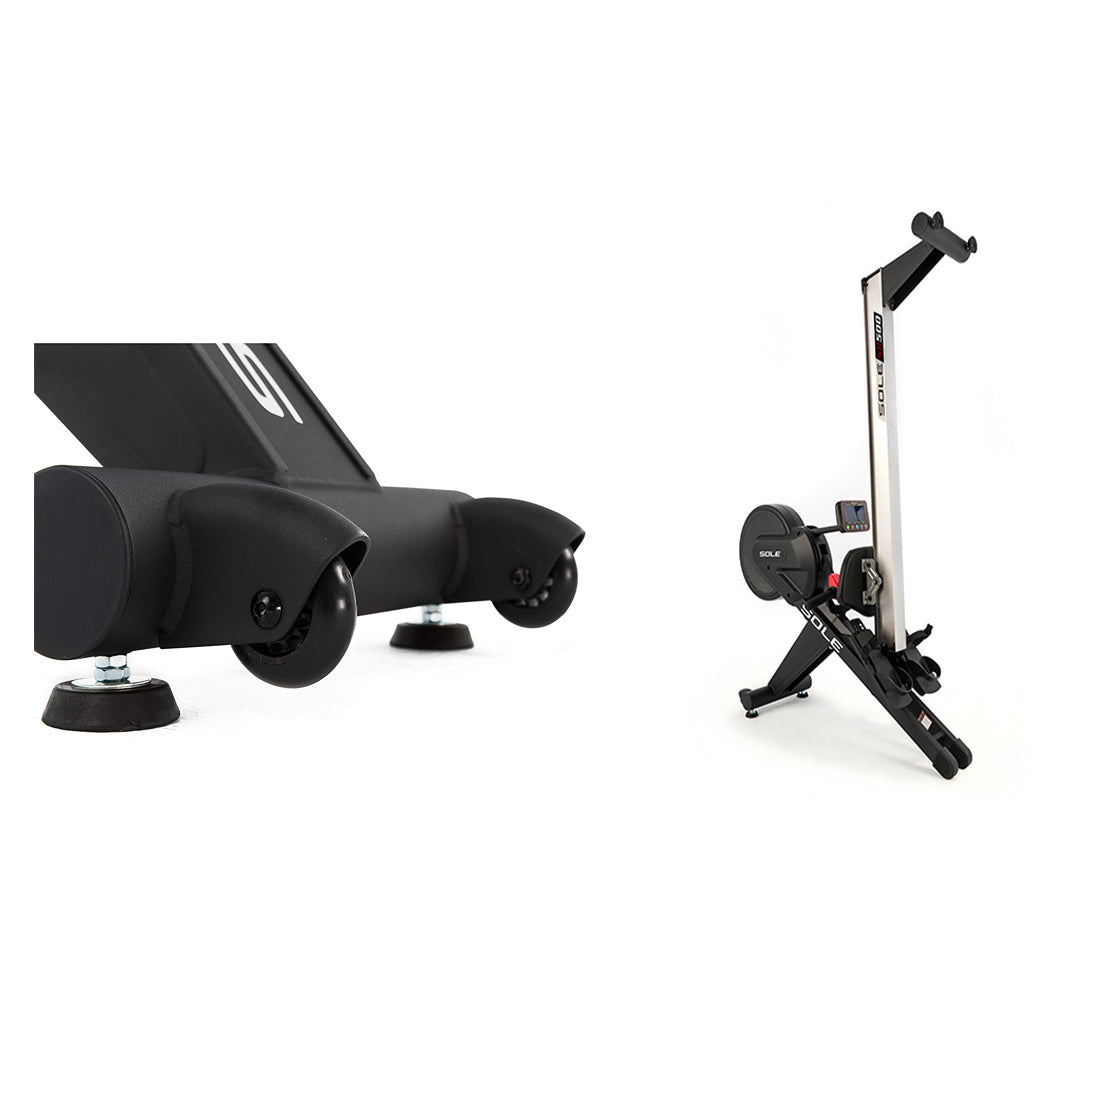 What Does the Rower Machine Work